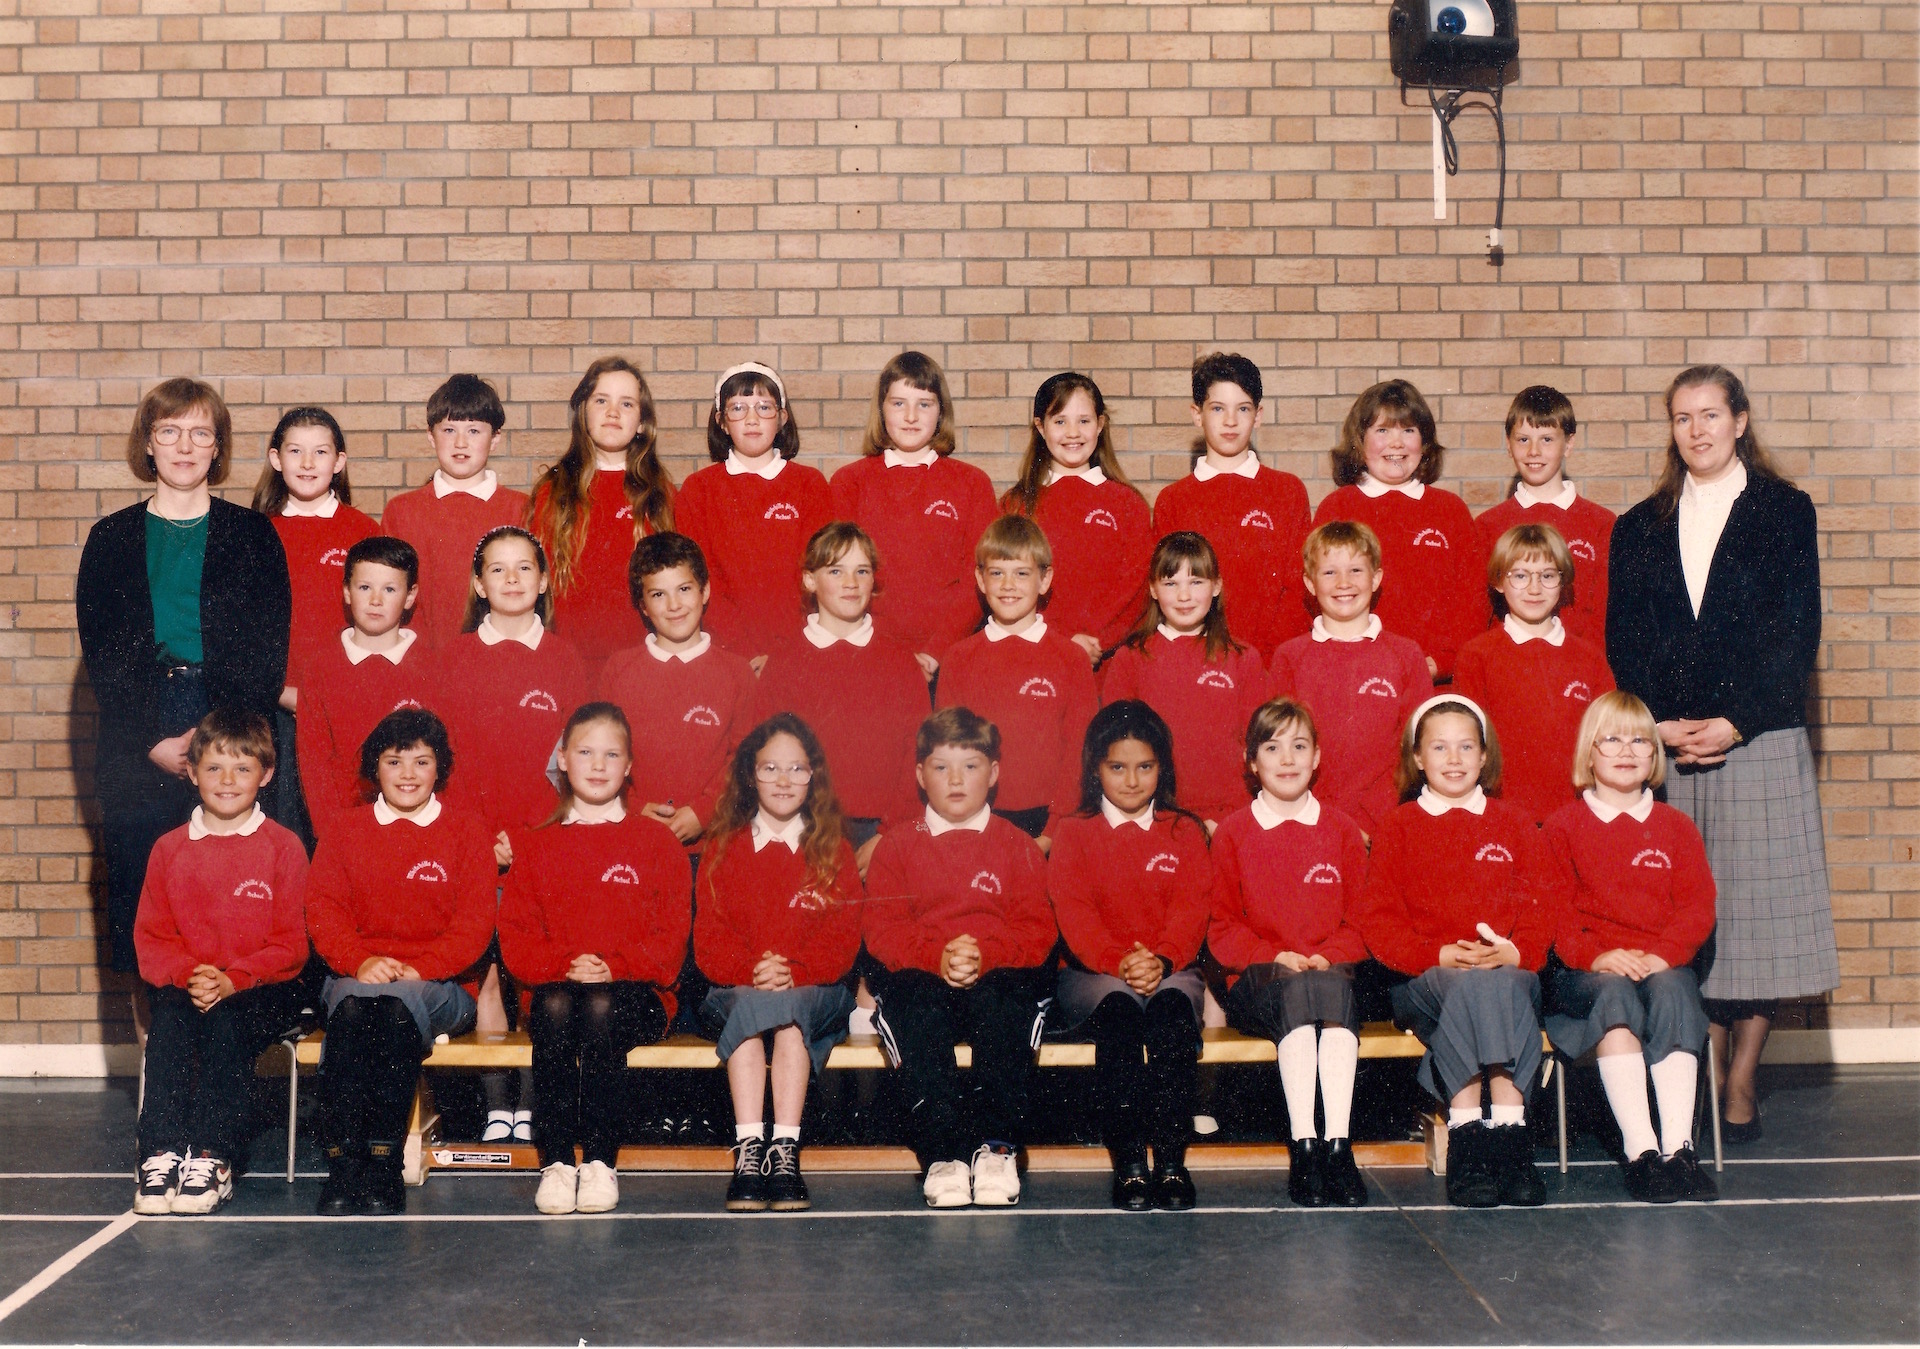 First school photo in Scotland: Kamila in middle row, far right